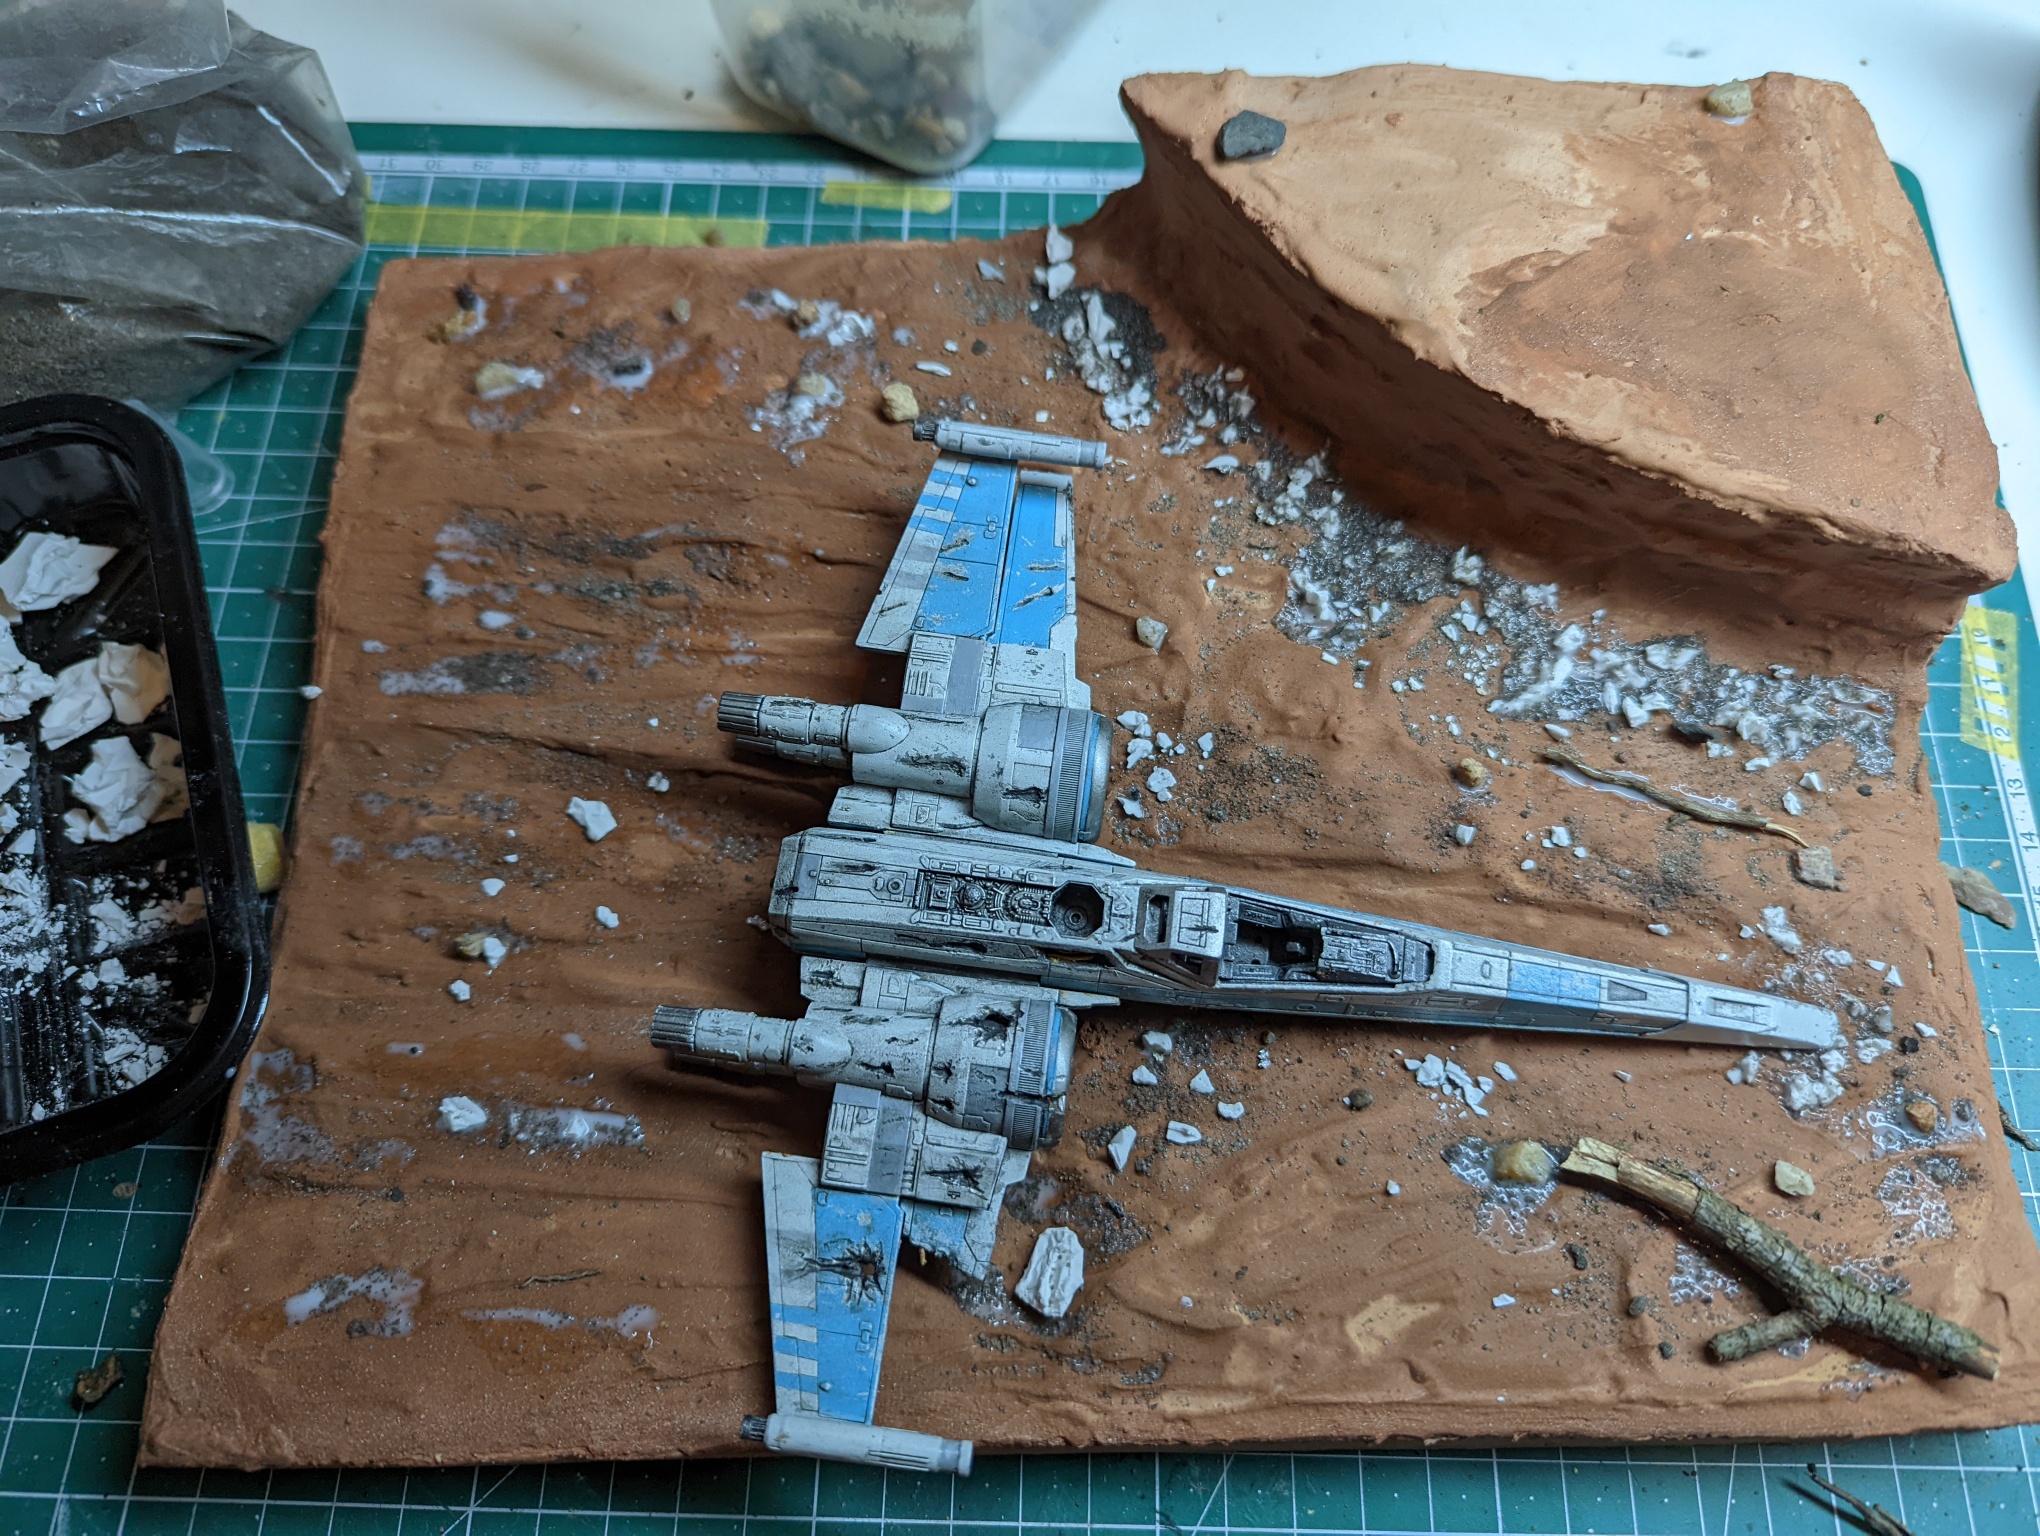 Added some sand, small stones, fragments of plaster and wood. Glued with watered-down PVA glue.